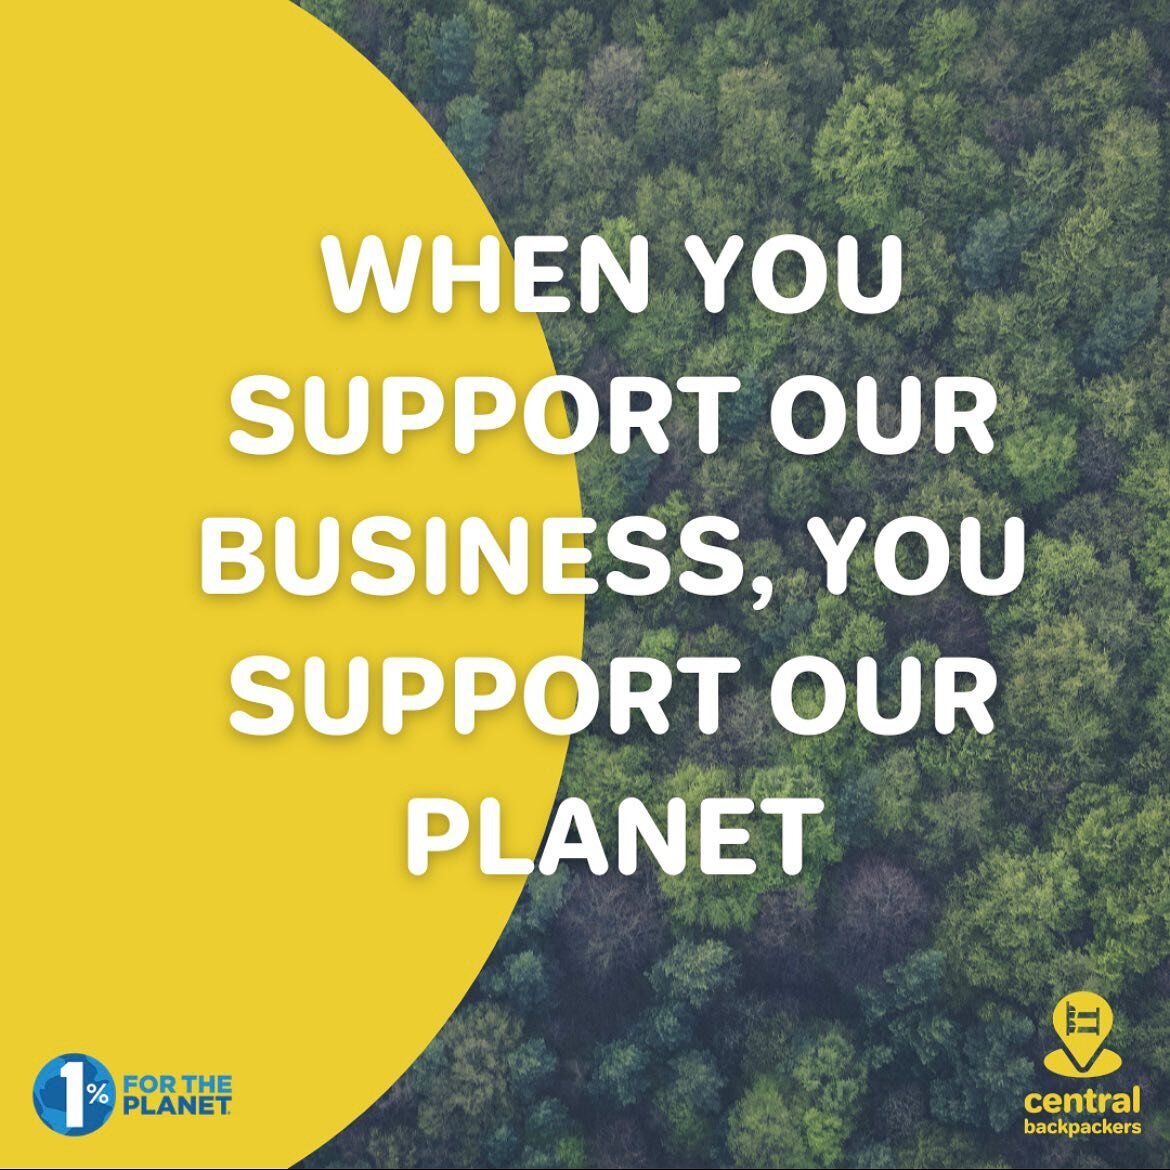 When you support us, you support our planet. Each year we choose three organizations in which to donate 1% of our sales through our membership with 1% For the Planet. 

The organizations we chose this year are The Greener Earth Project, Marine Conser